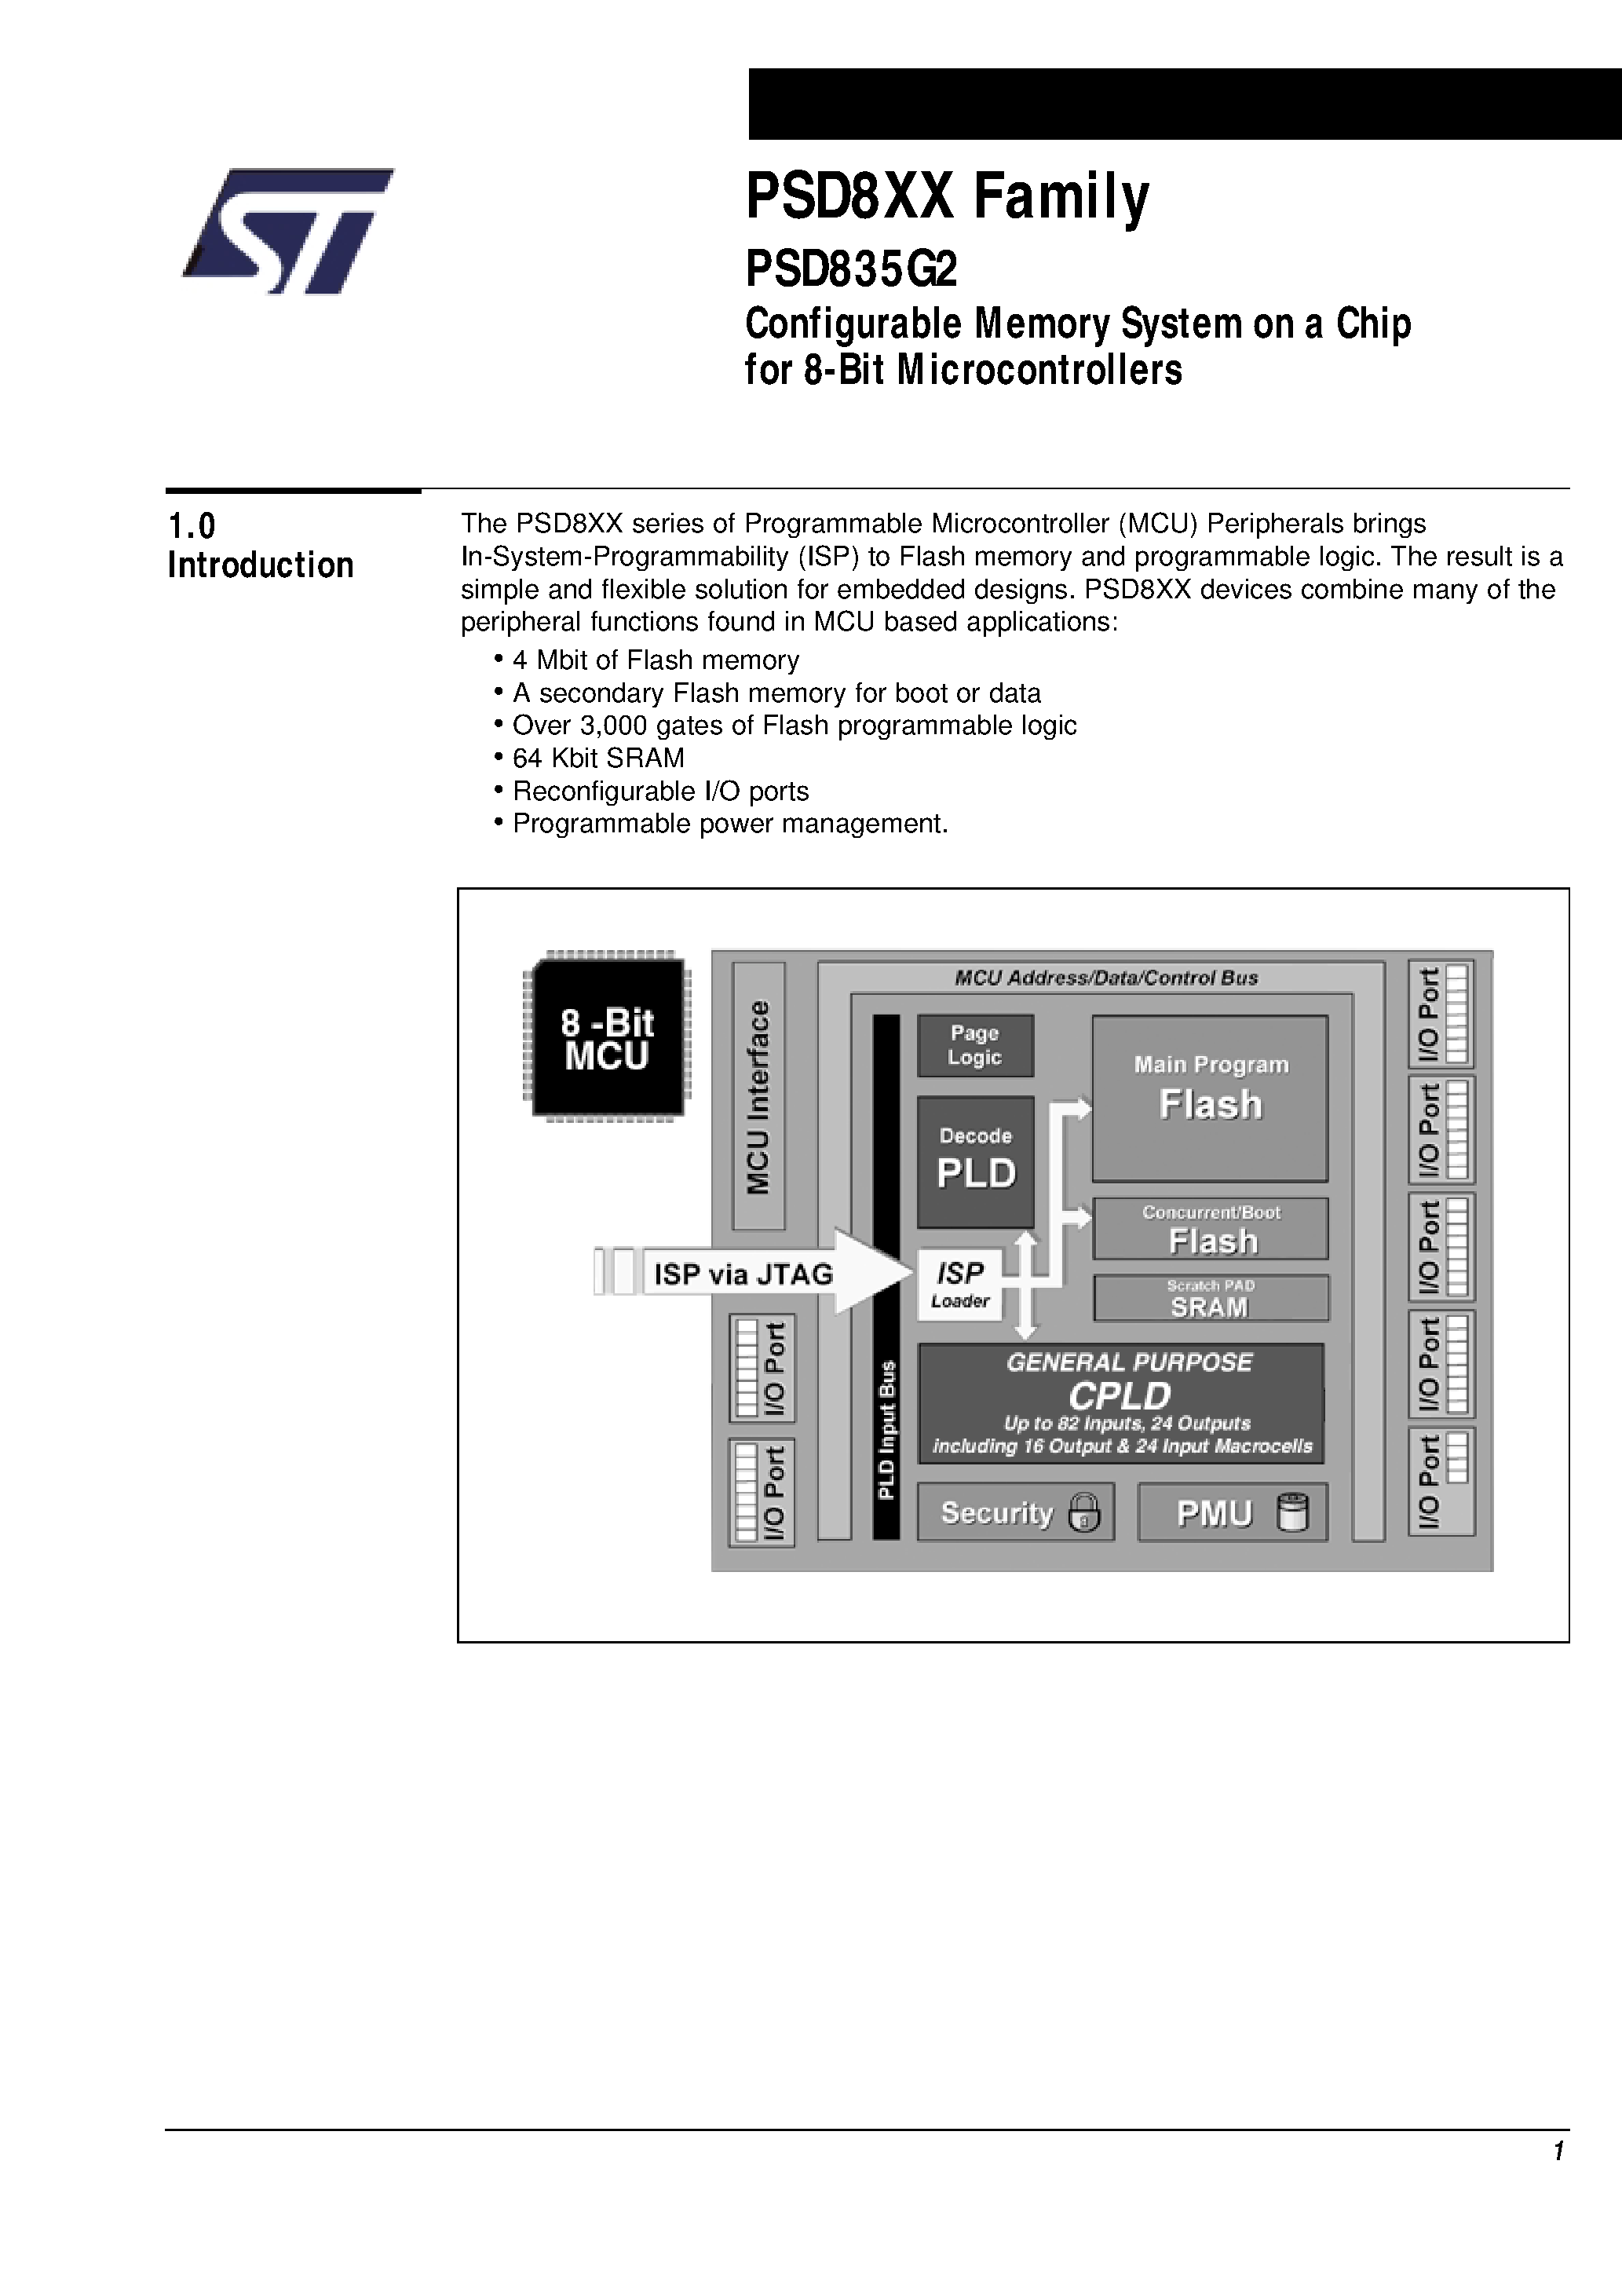 Datasheet PSD835F2-A-20JI - Configurable Memory System on a Chip for 8-Bit Microcontrollers page 2